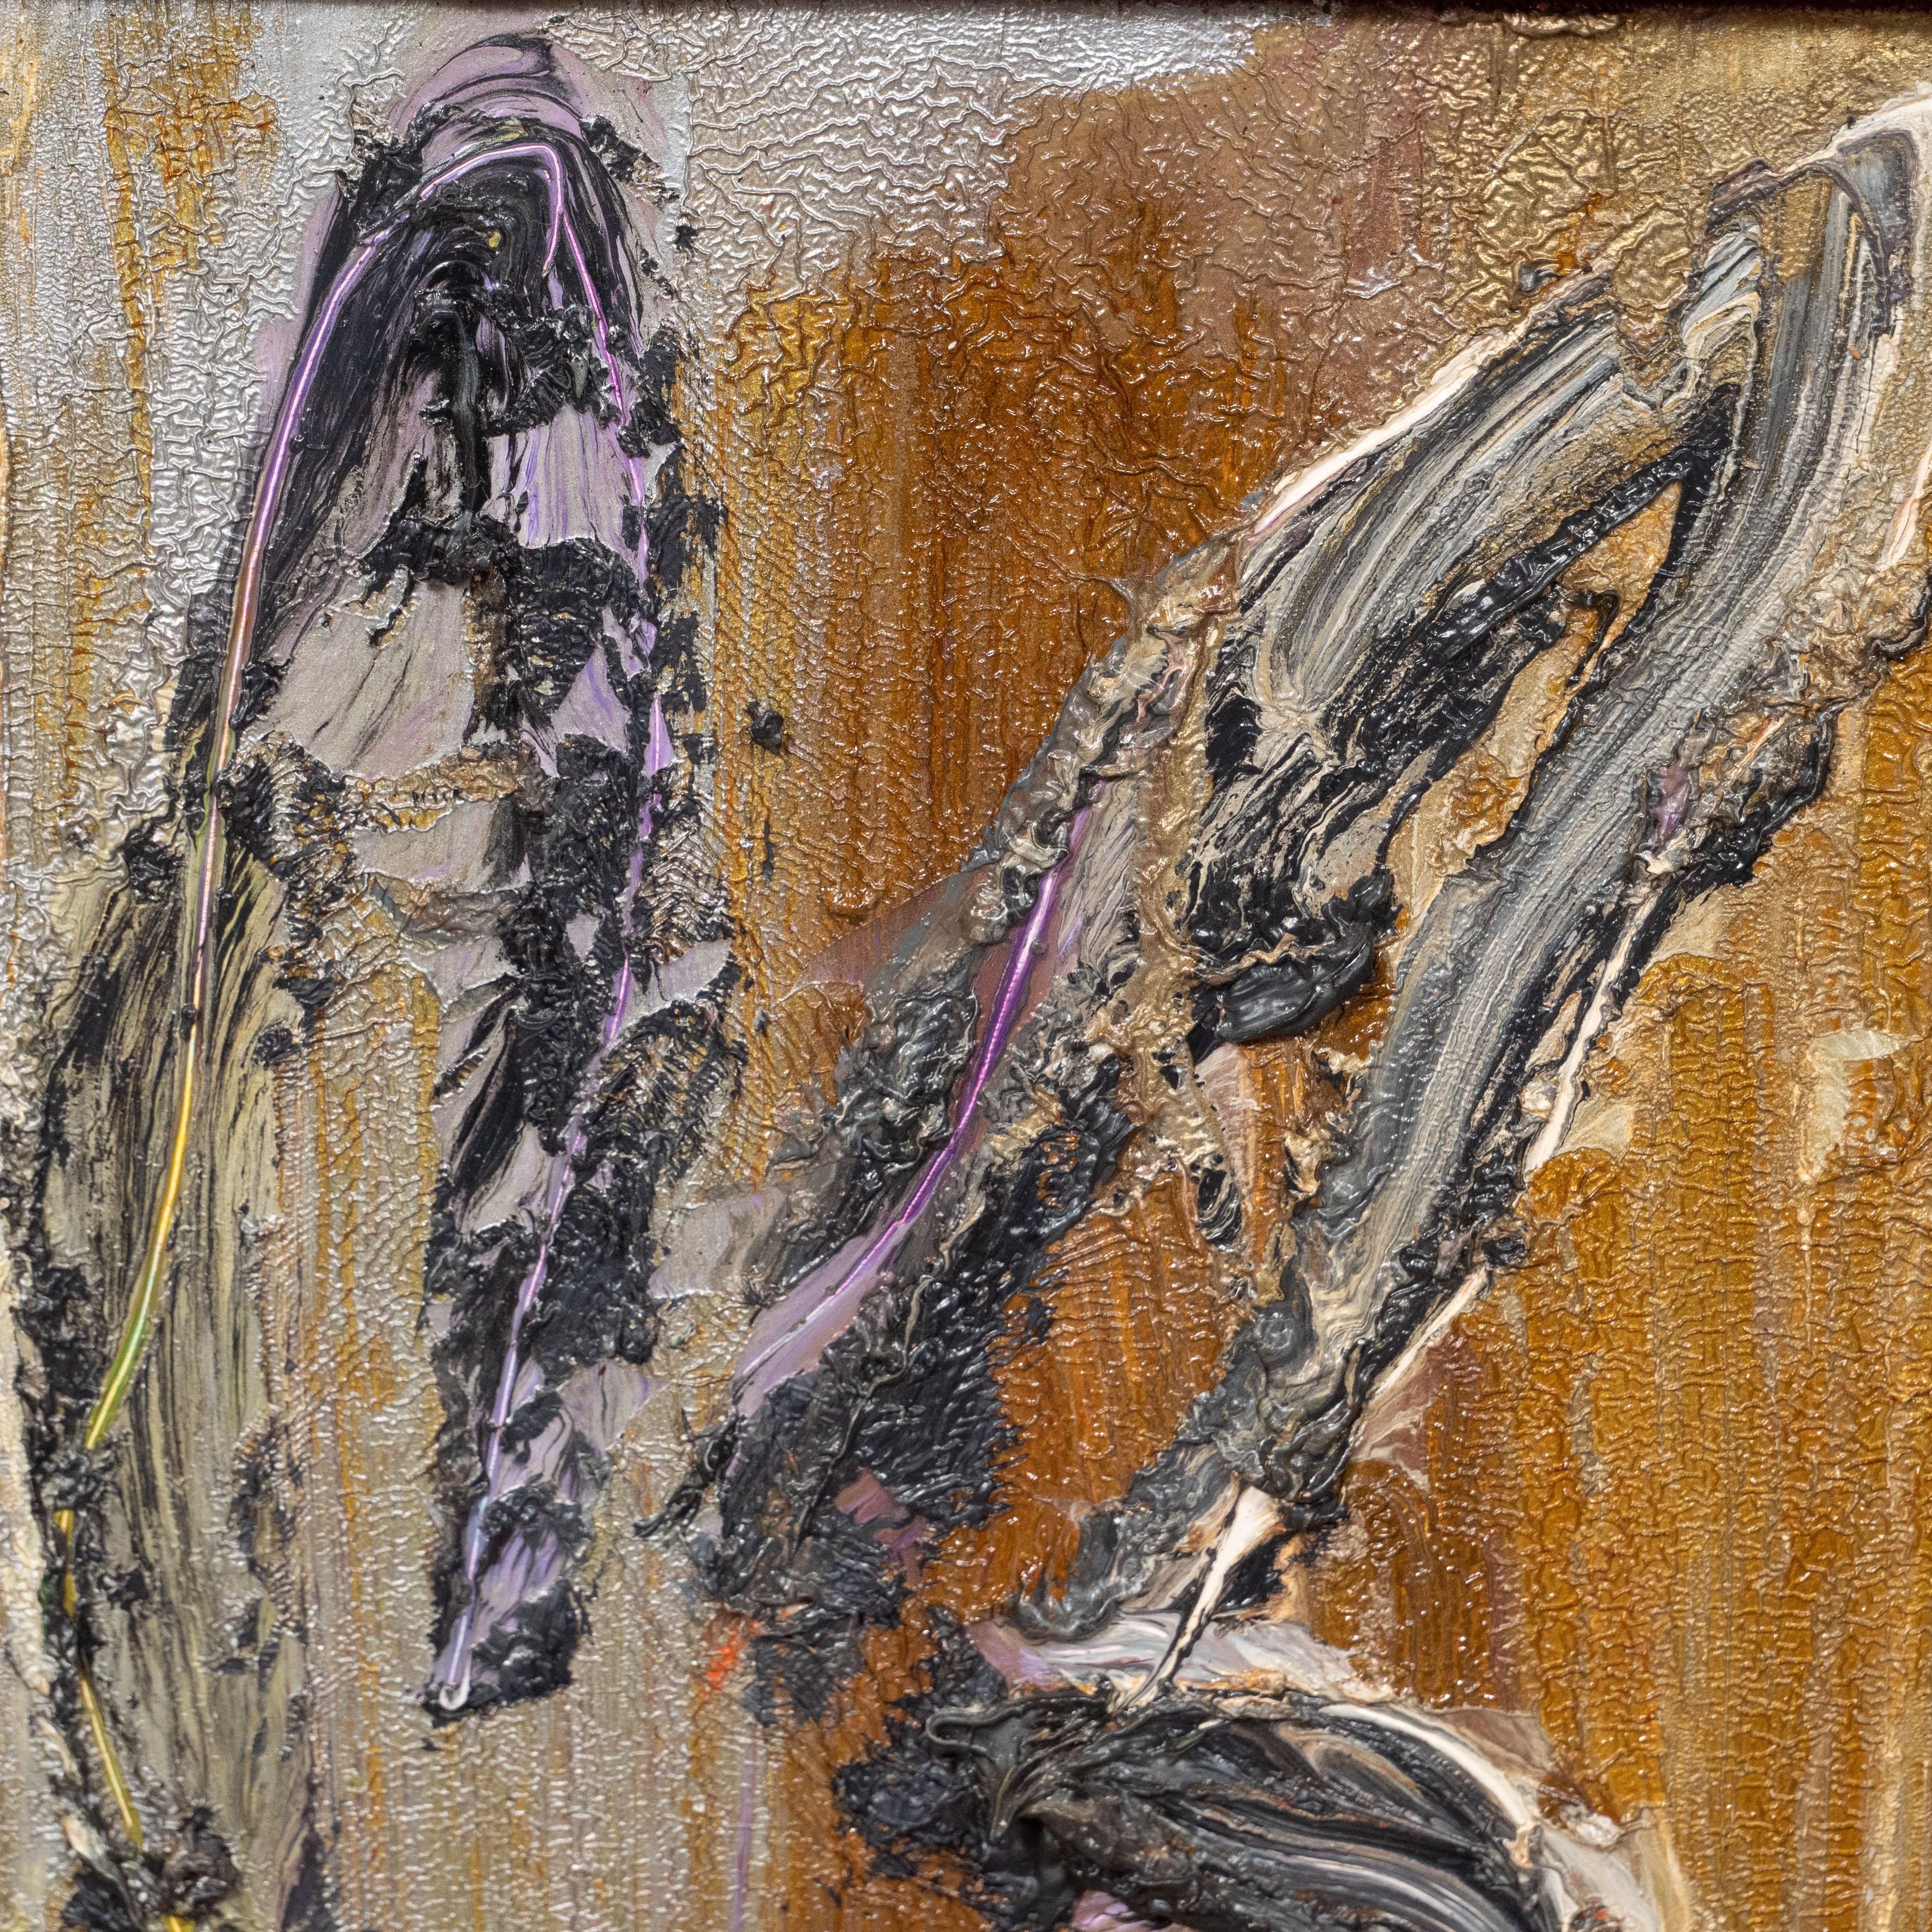 This whimsical and sophisticated painting was realized by the esteemed contemporary painter, Hunt Slonem in 2016. It presents a stylized rabbit in profile, rendered with loose and expressive brush strokes in heavily impasto black paint with lavender